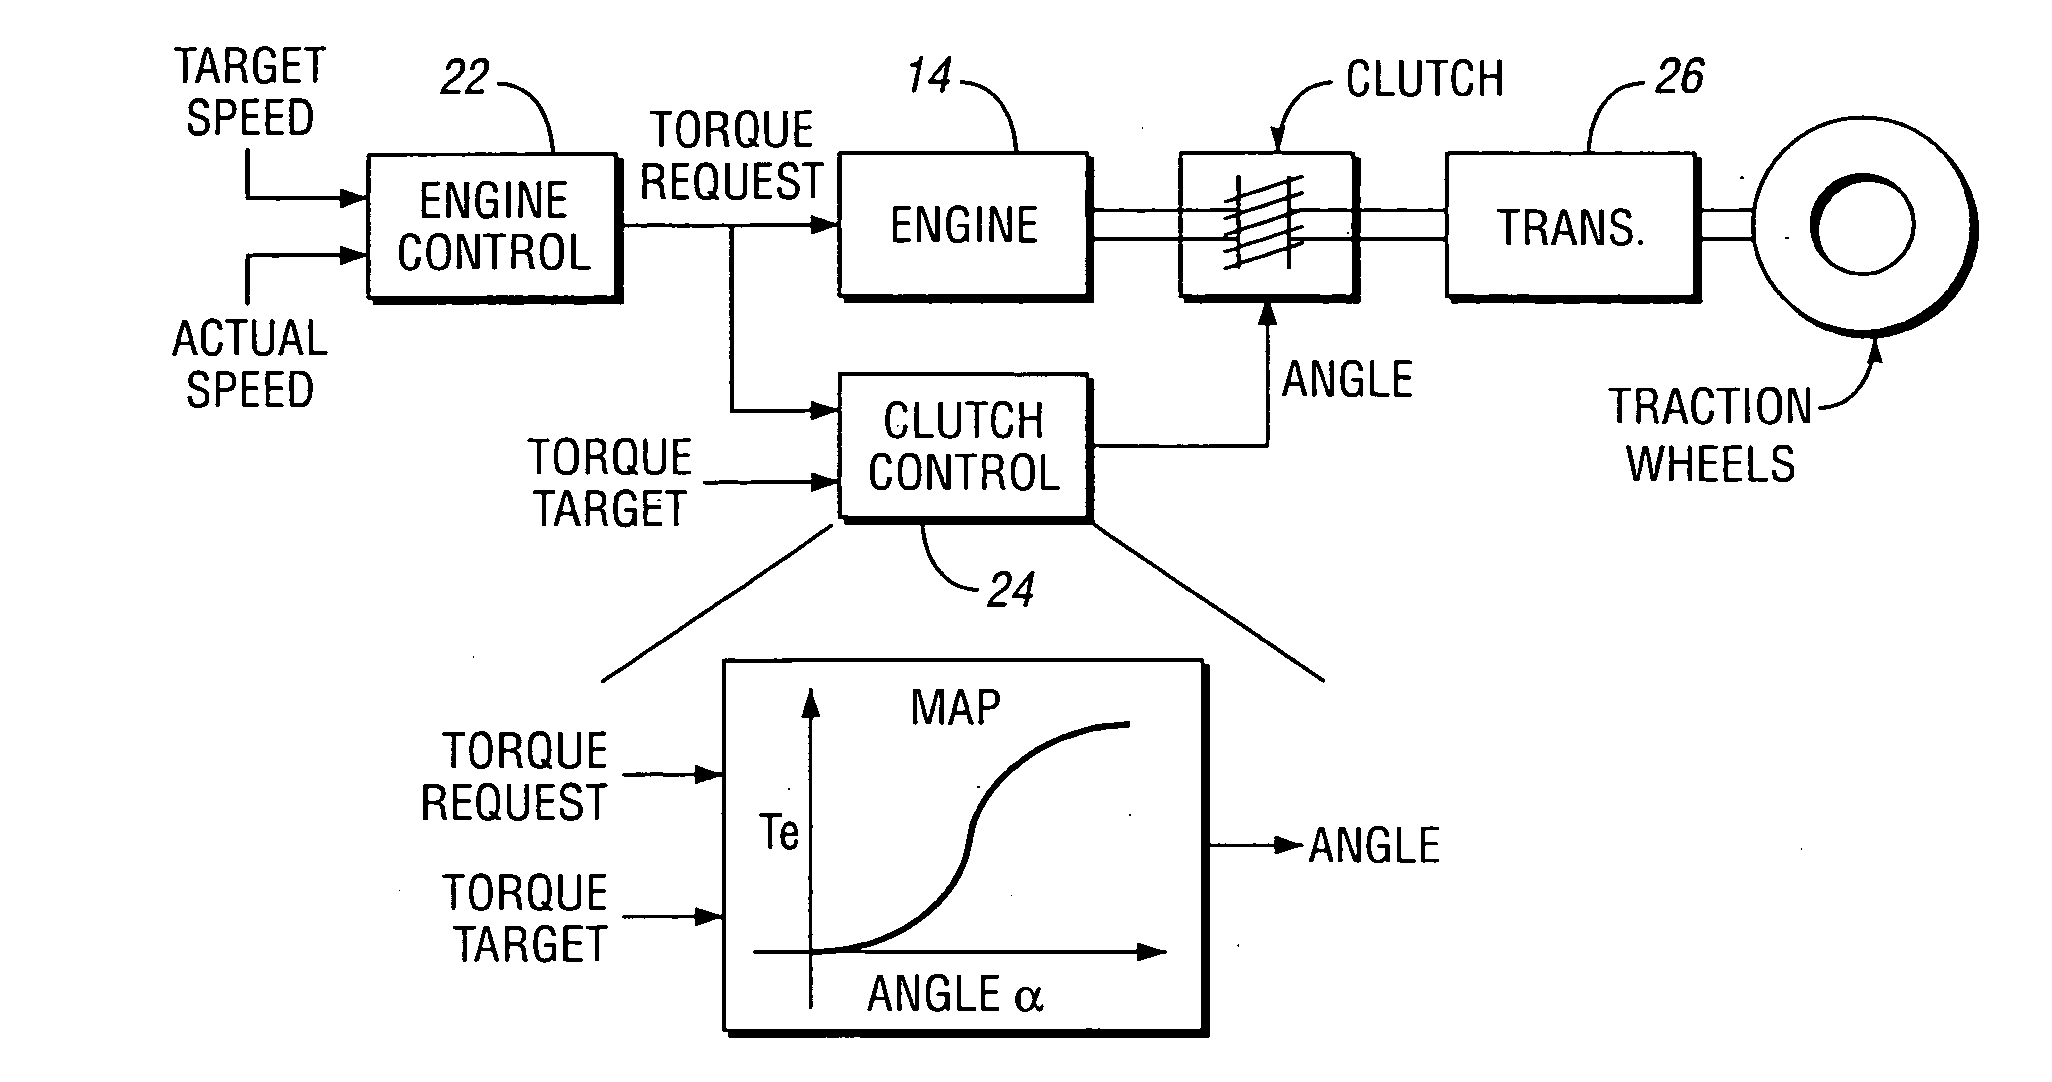 Method for estimating clutch engagement parameters in a strategy for clutch management in a vehicle powertrain